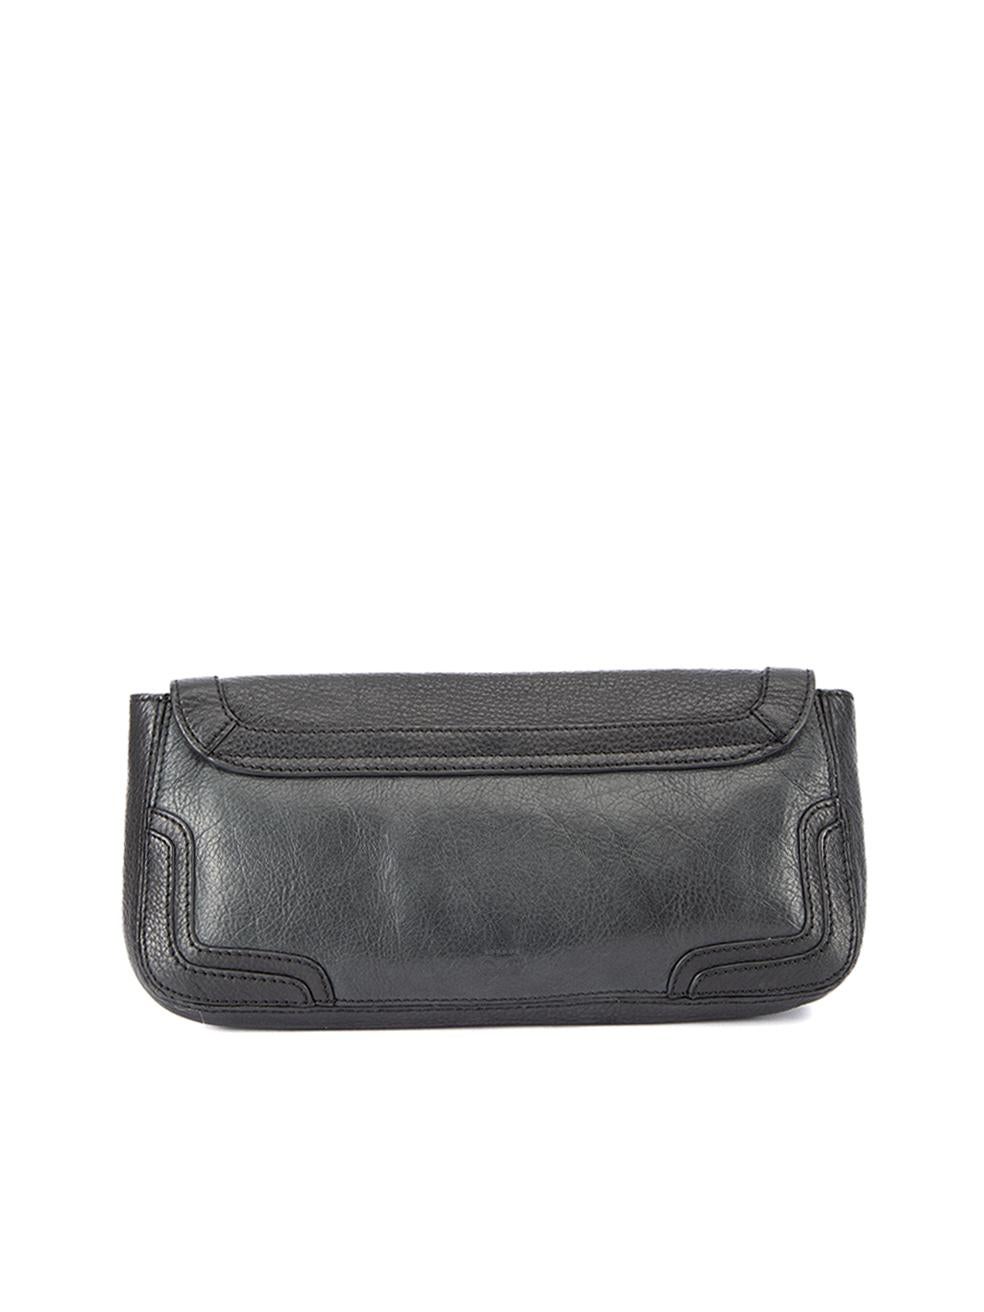 Anya Hindmarch Women's Black Leather Flap Clutch In Excellent Condition In London, GB